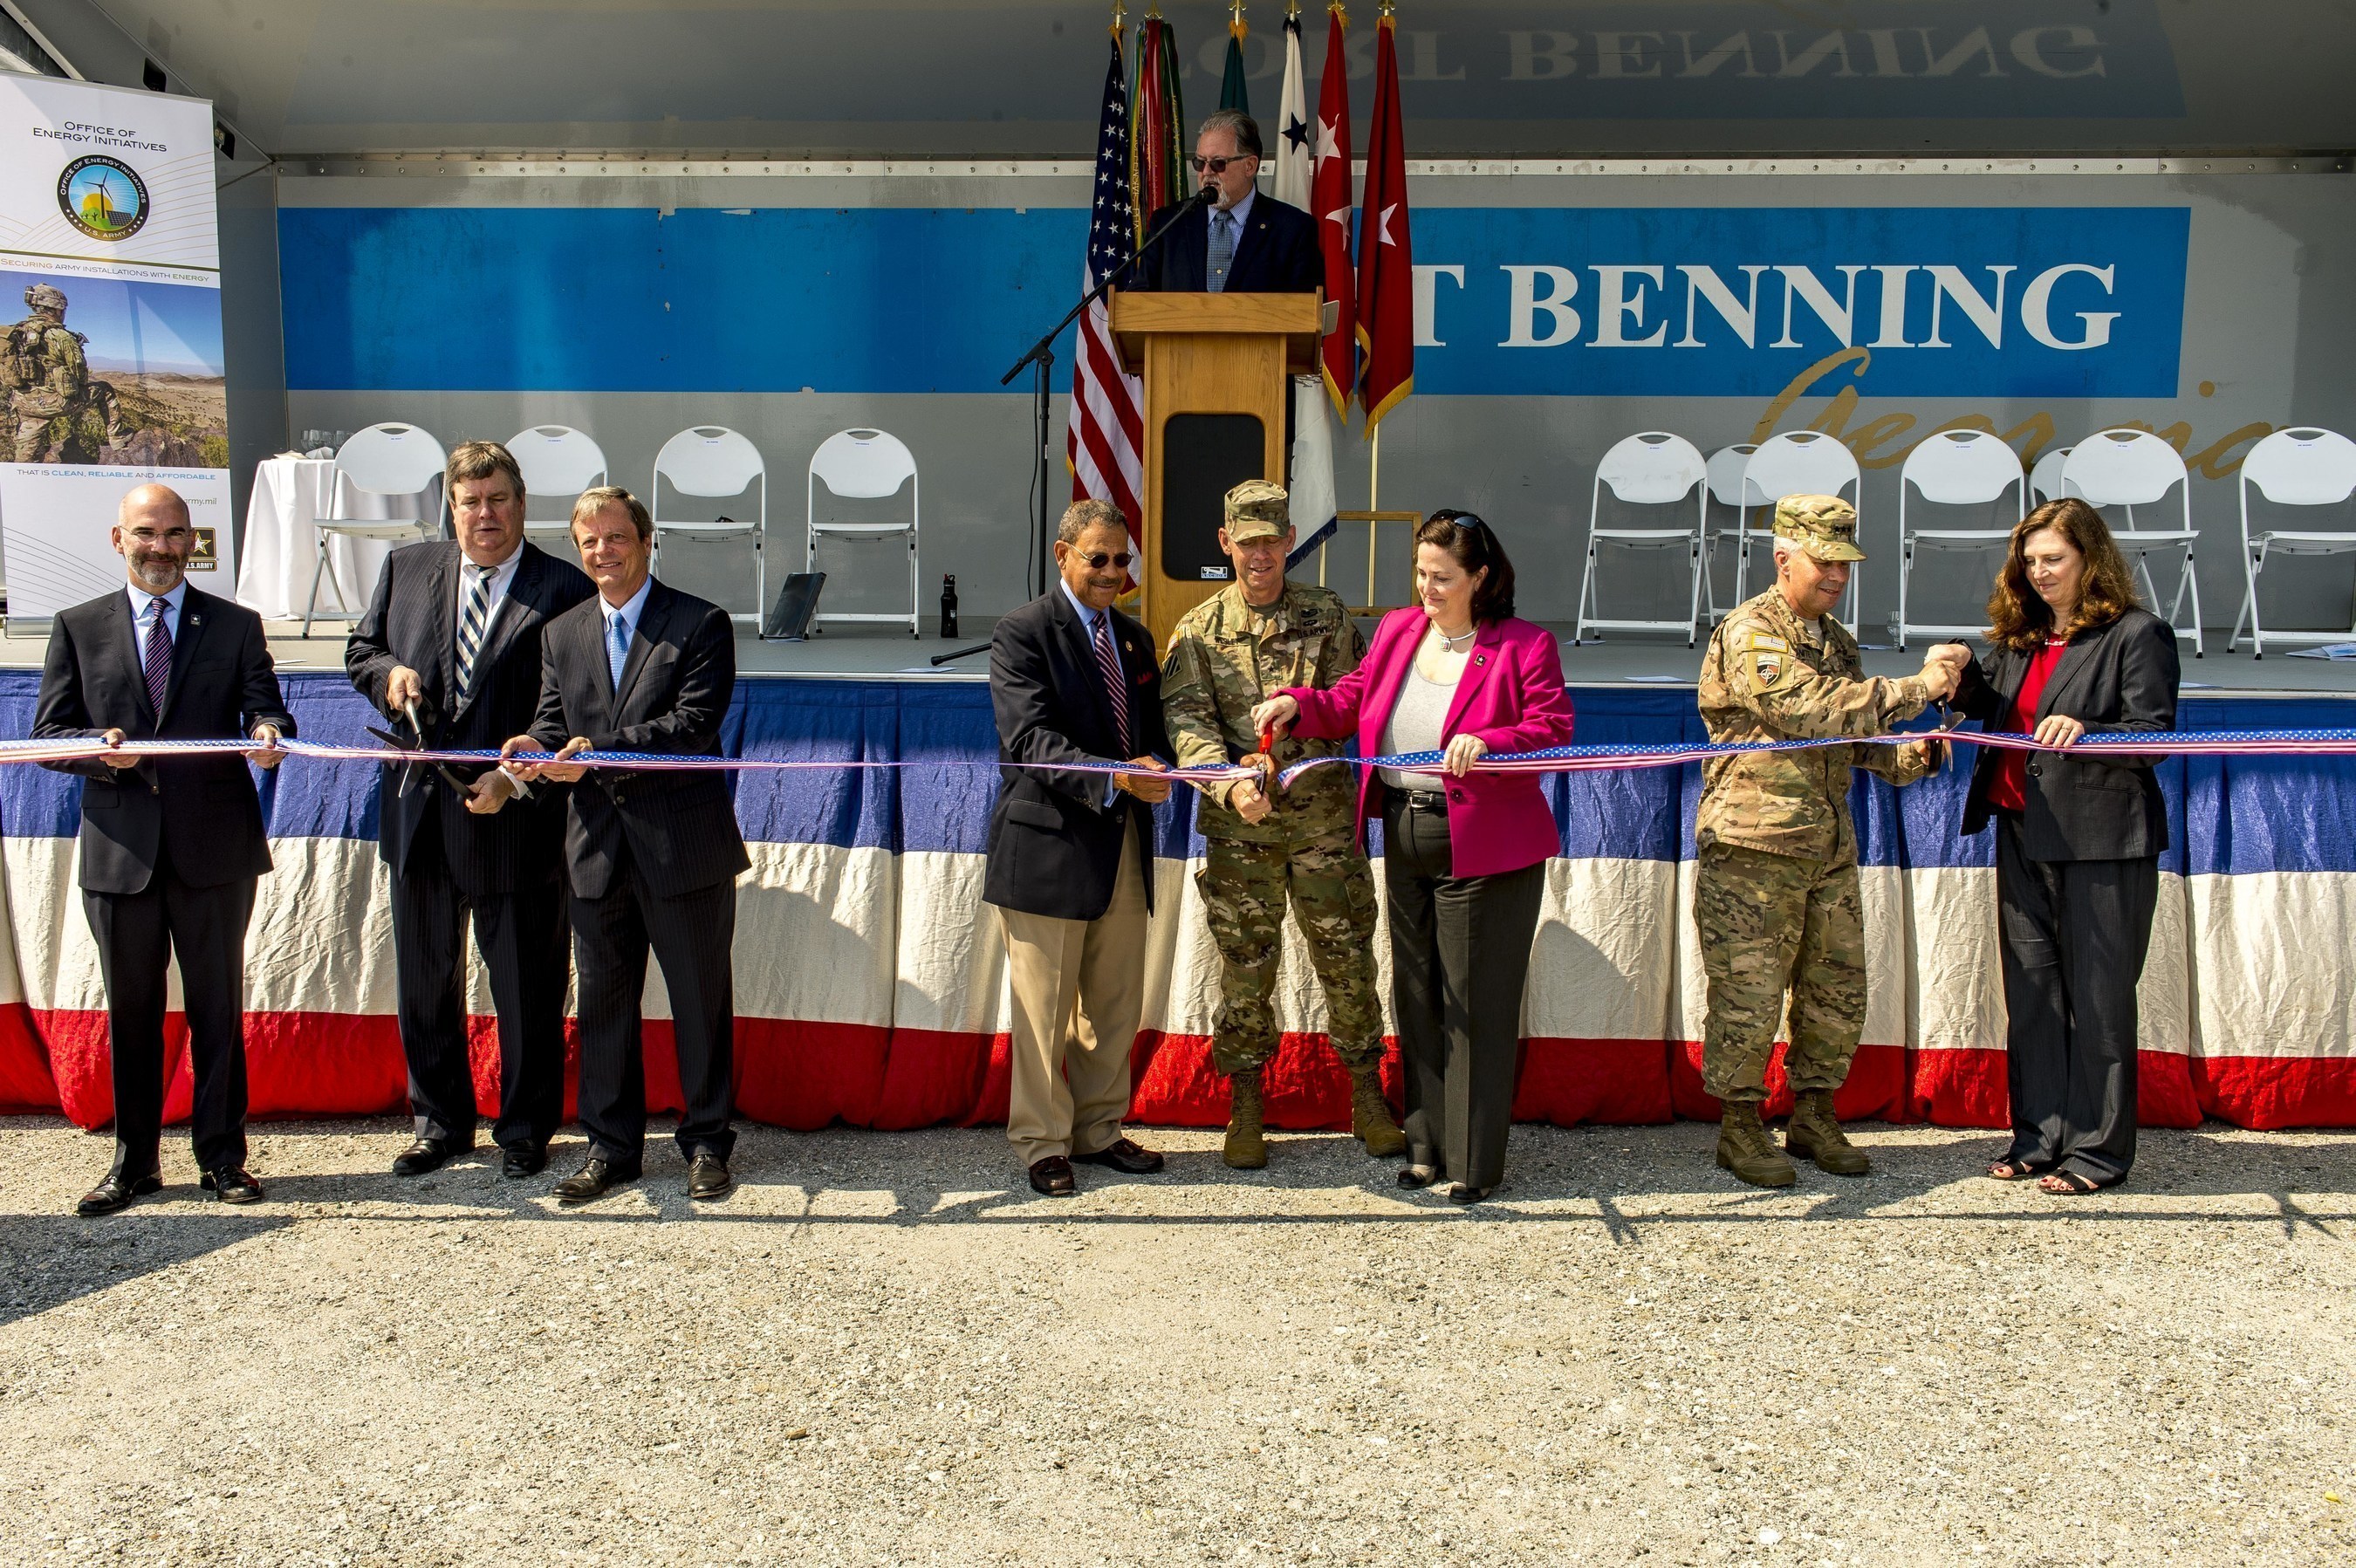 Officials from Georgia Power, the U.S. Army, the Army Office of Energy Initiatives (OEI), the General Services Administration and the Georgia Public Service Commission (PSC) mark the start of operations of the 30 megawatt solar project at Fort Benning.